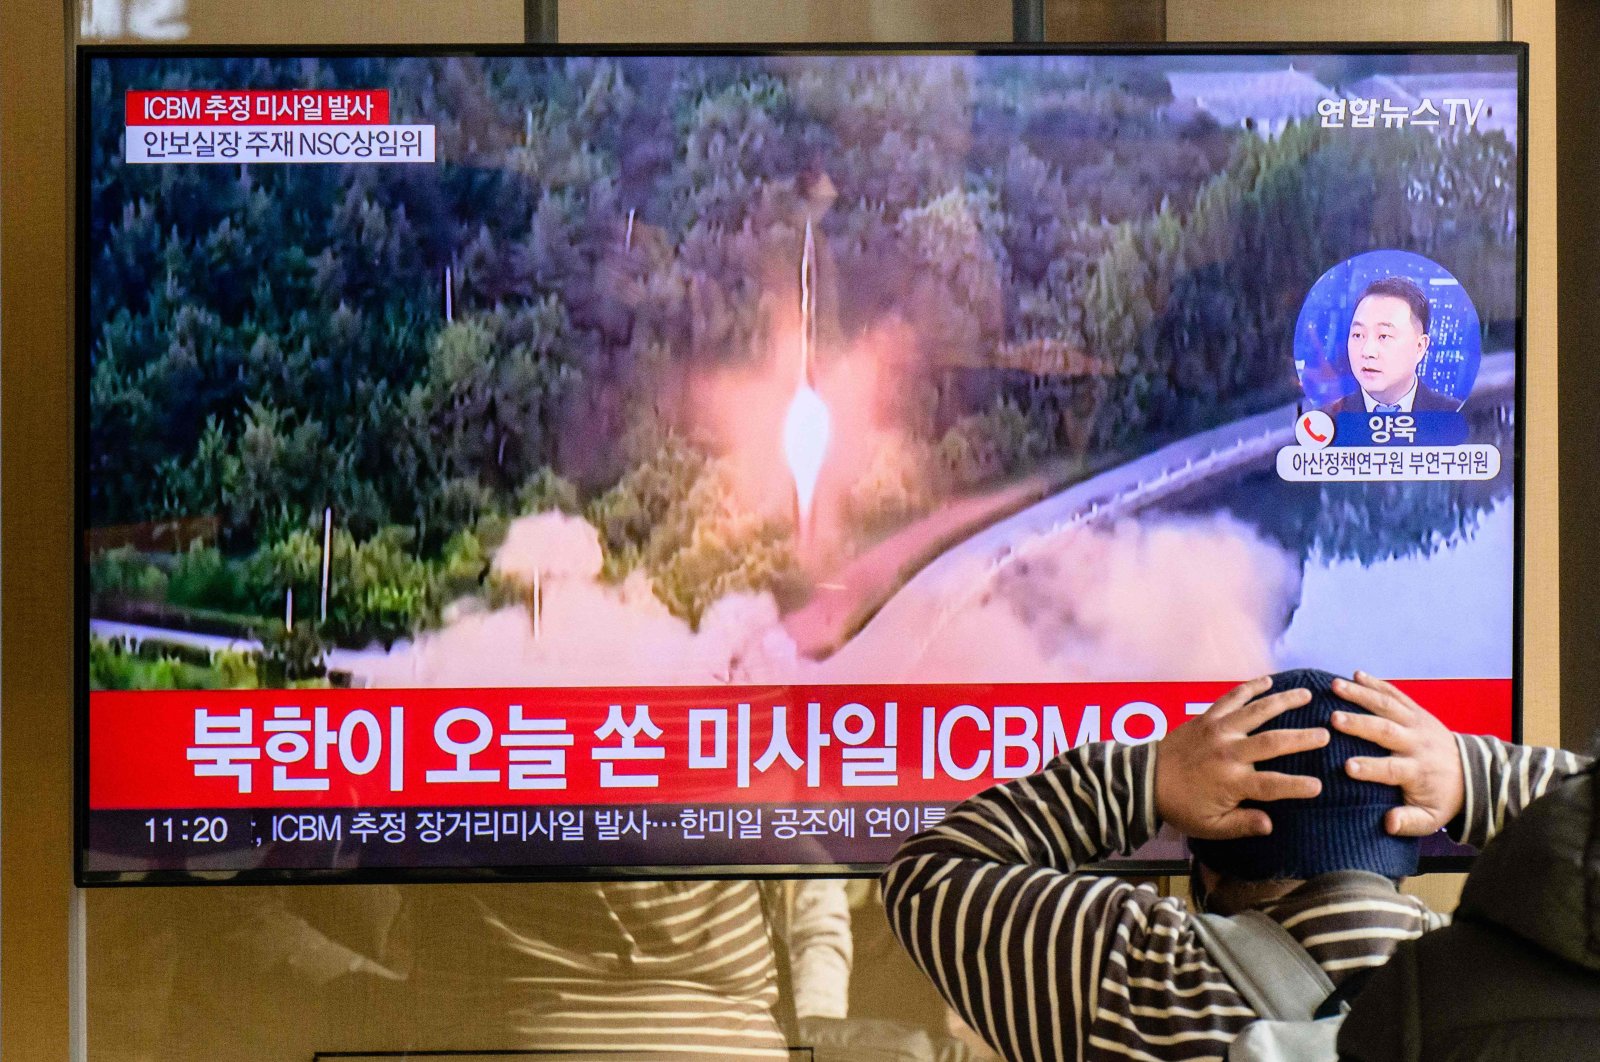 A man reacts to television reports on news broadcast with file footage of a North Korean missile test, Seoul, South Korea, Nov. 18, 2022. (AFP Photo)